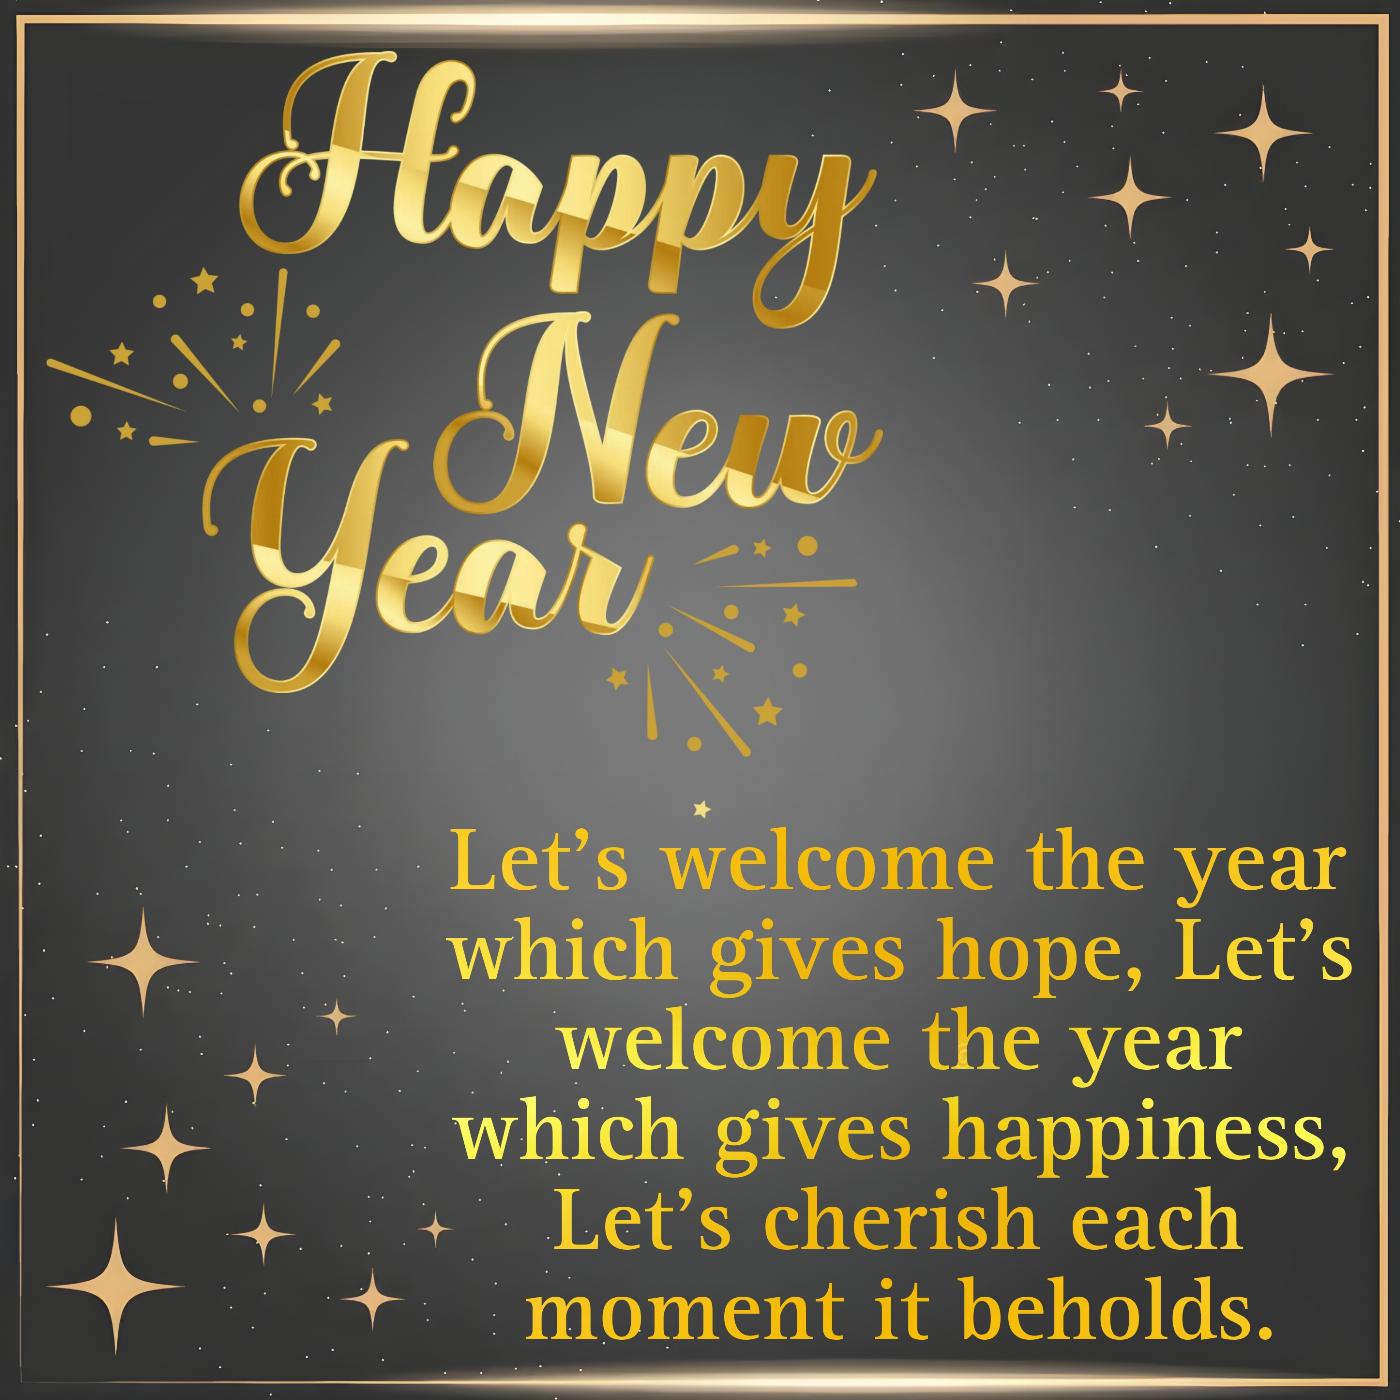 Lets welcome the year which gives hope